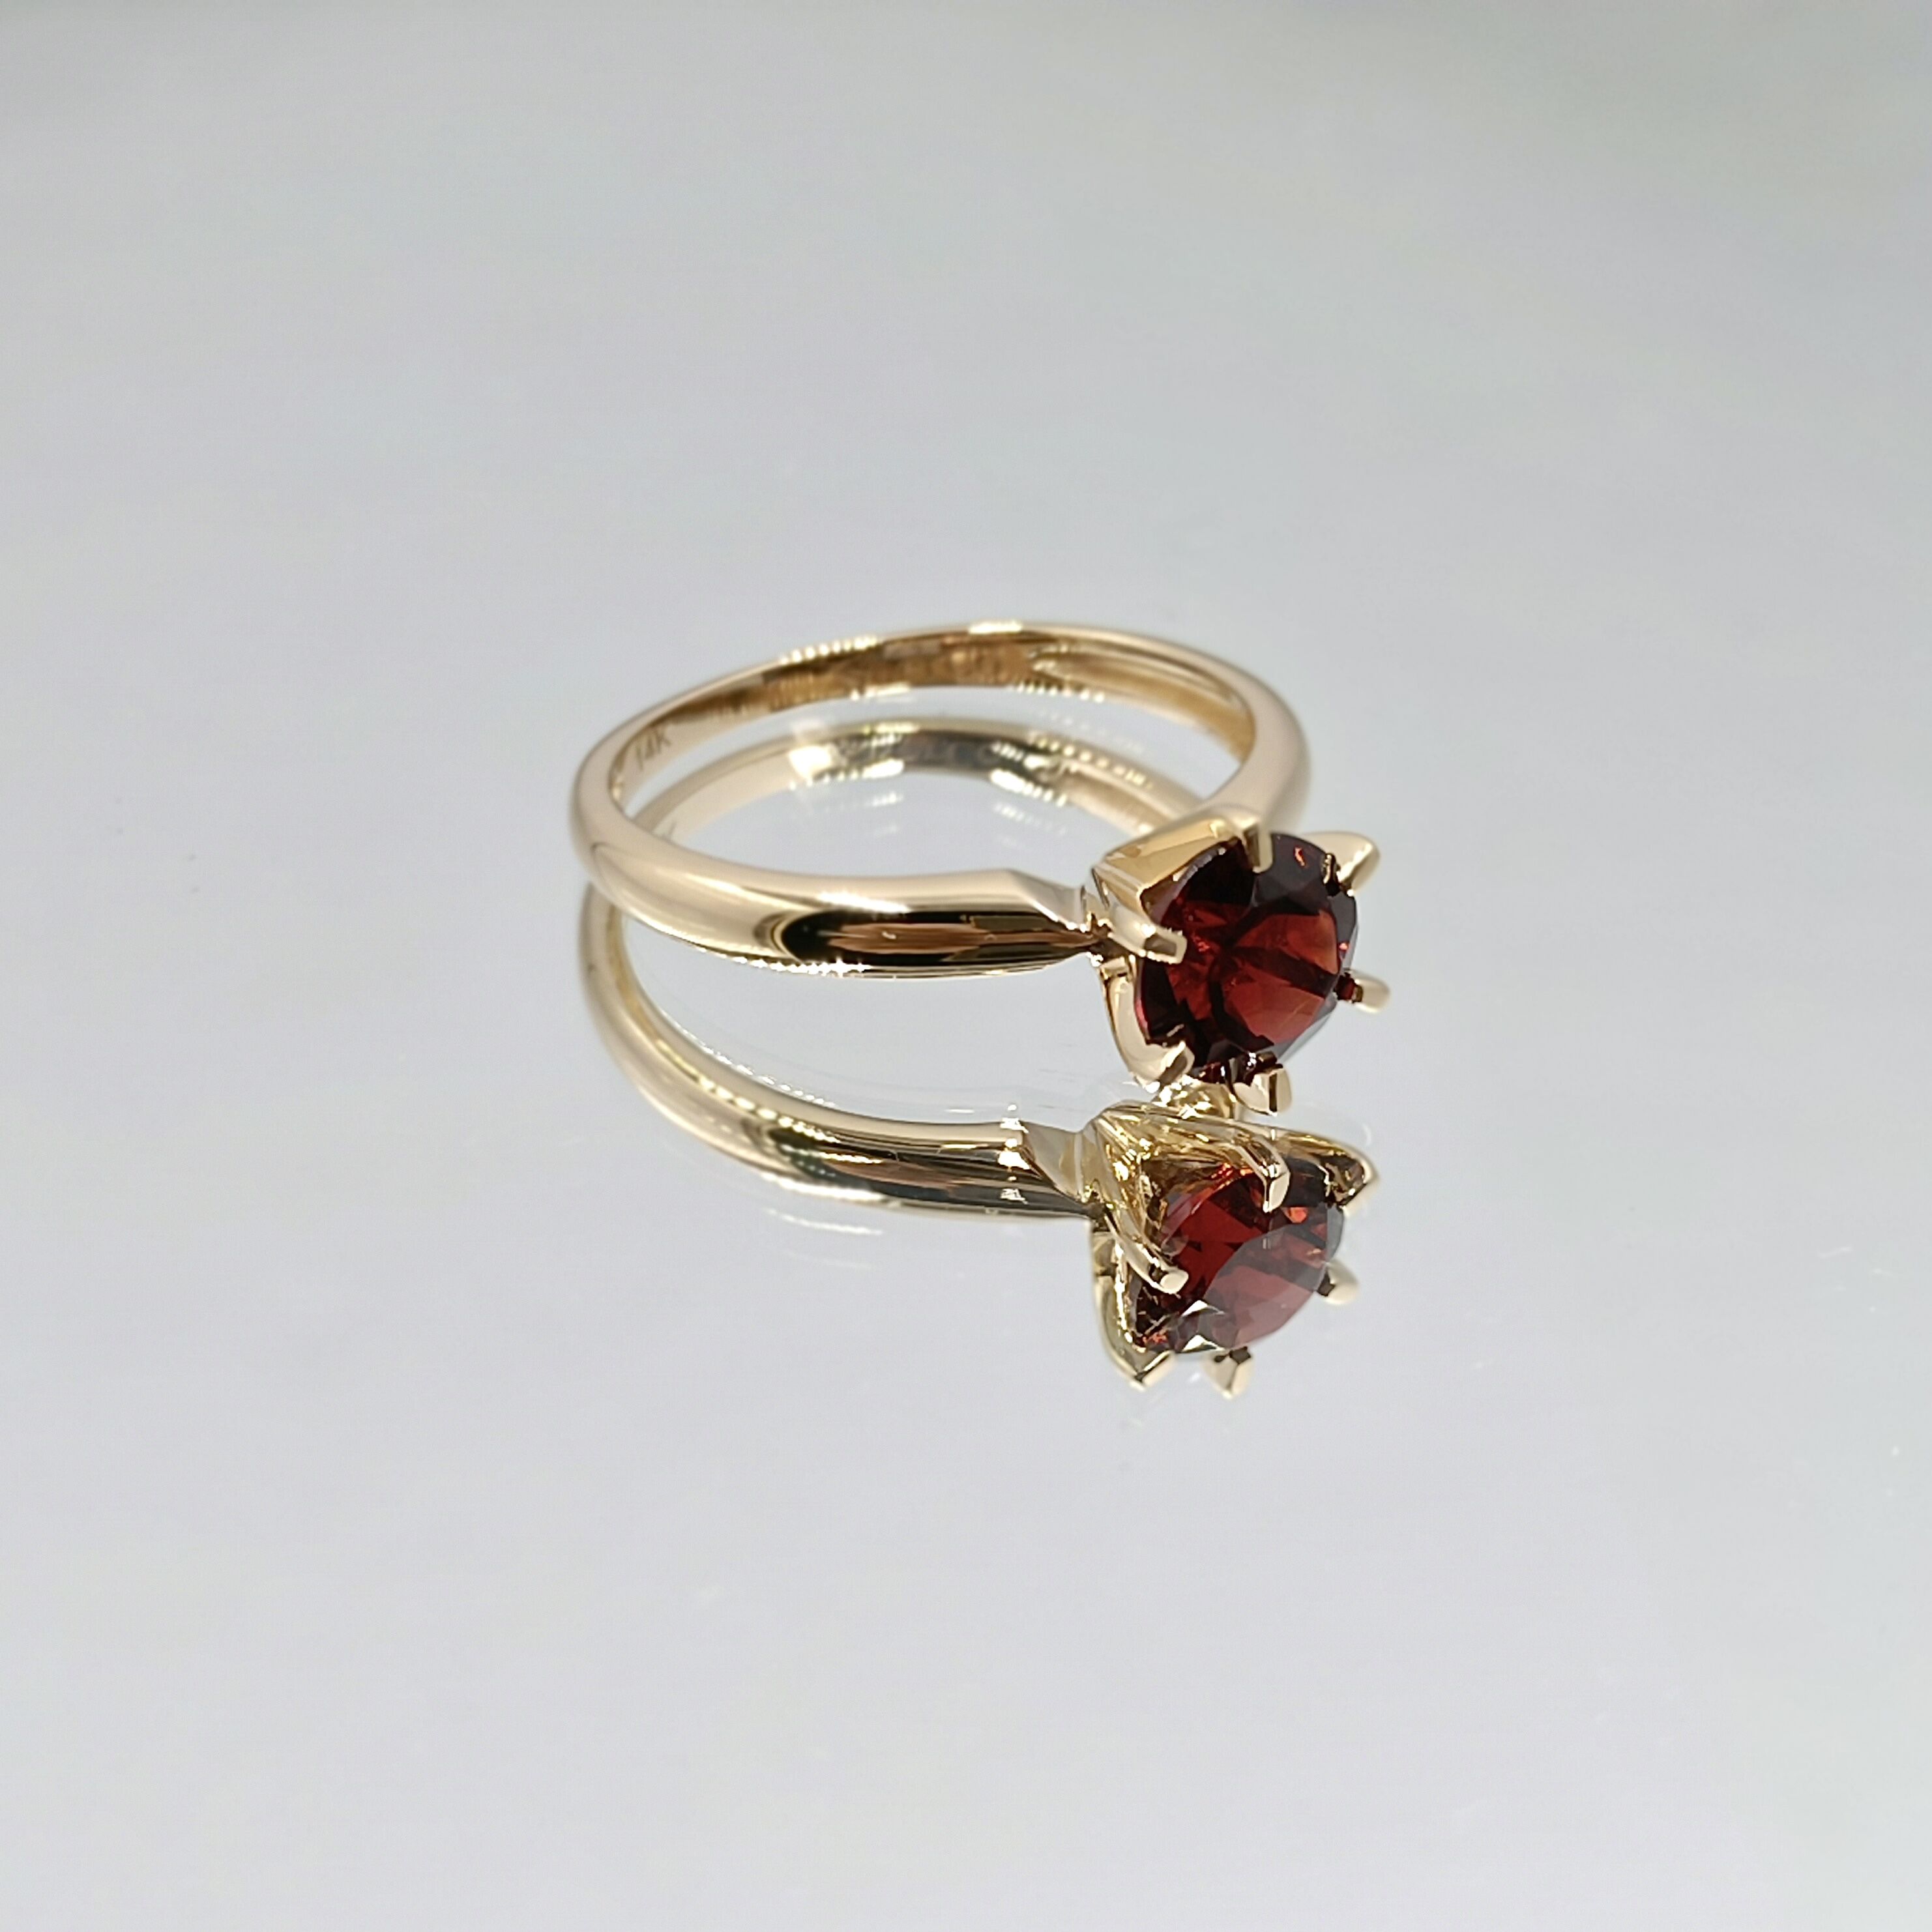 Solitaire Gold Ring Gemstone Rings Red Ruby Round Cut Engagement Ring 14k Gold Jewelry Garnet Stone Ring-3